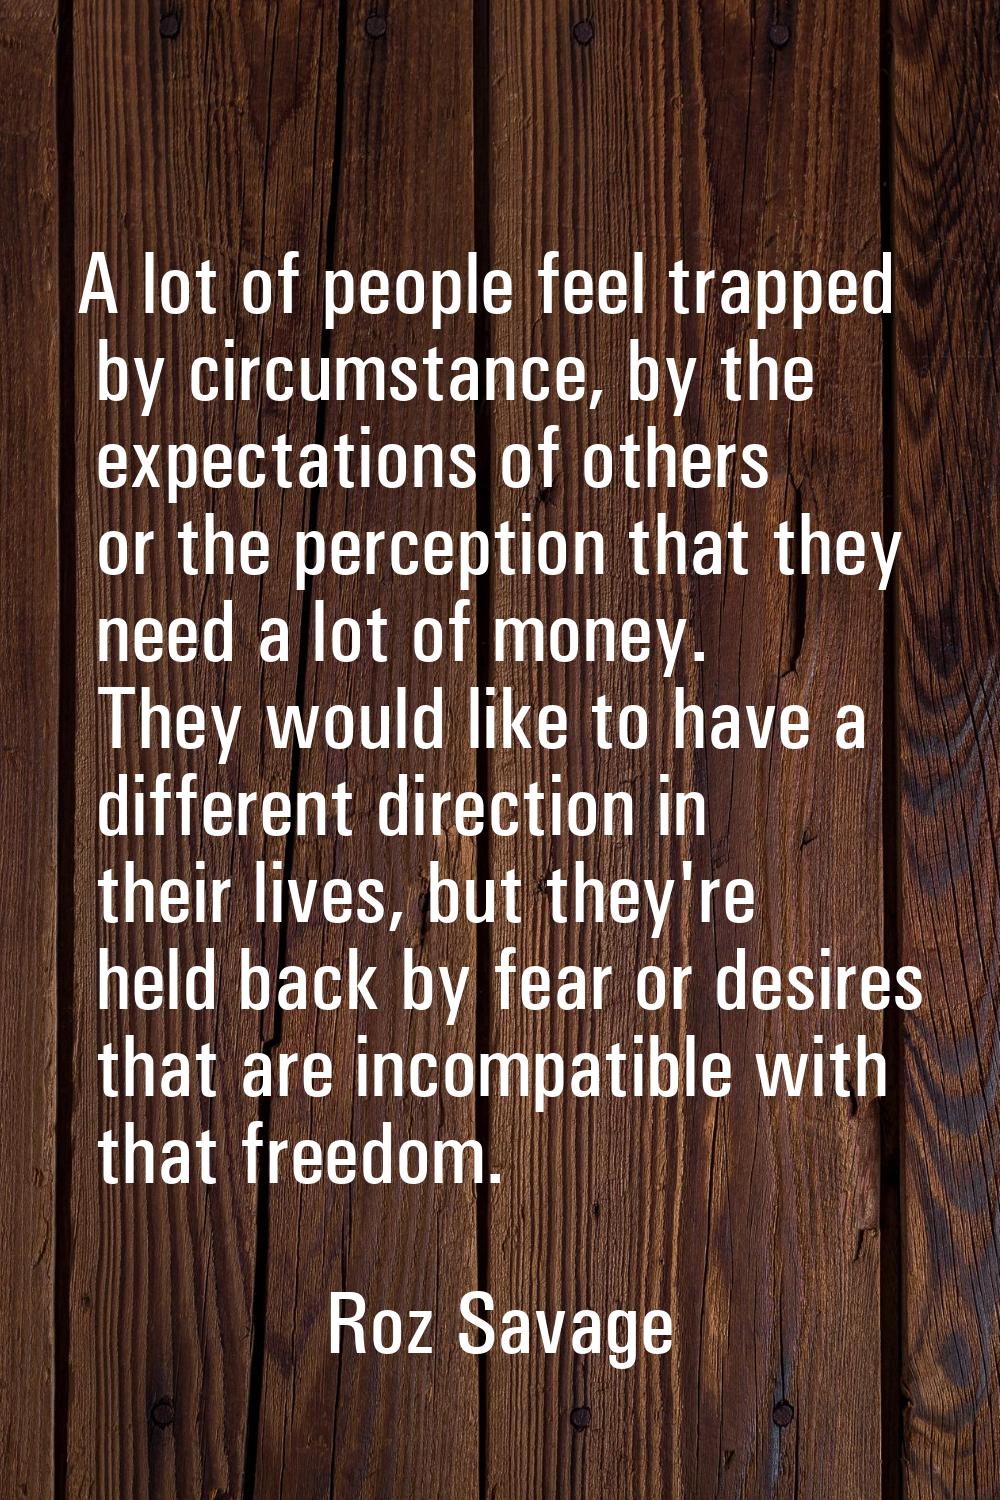 A lot of people feel trapped by circumstance, by the expectations of others or the perception that 